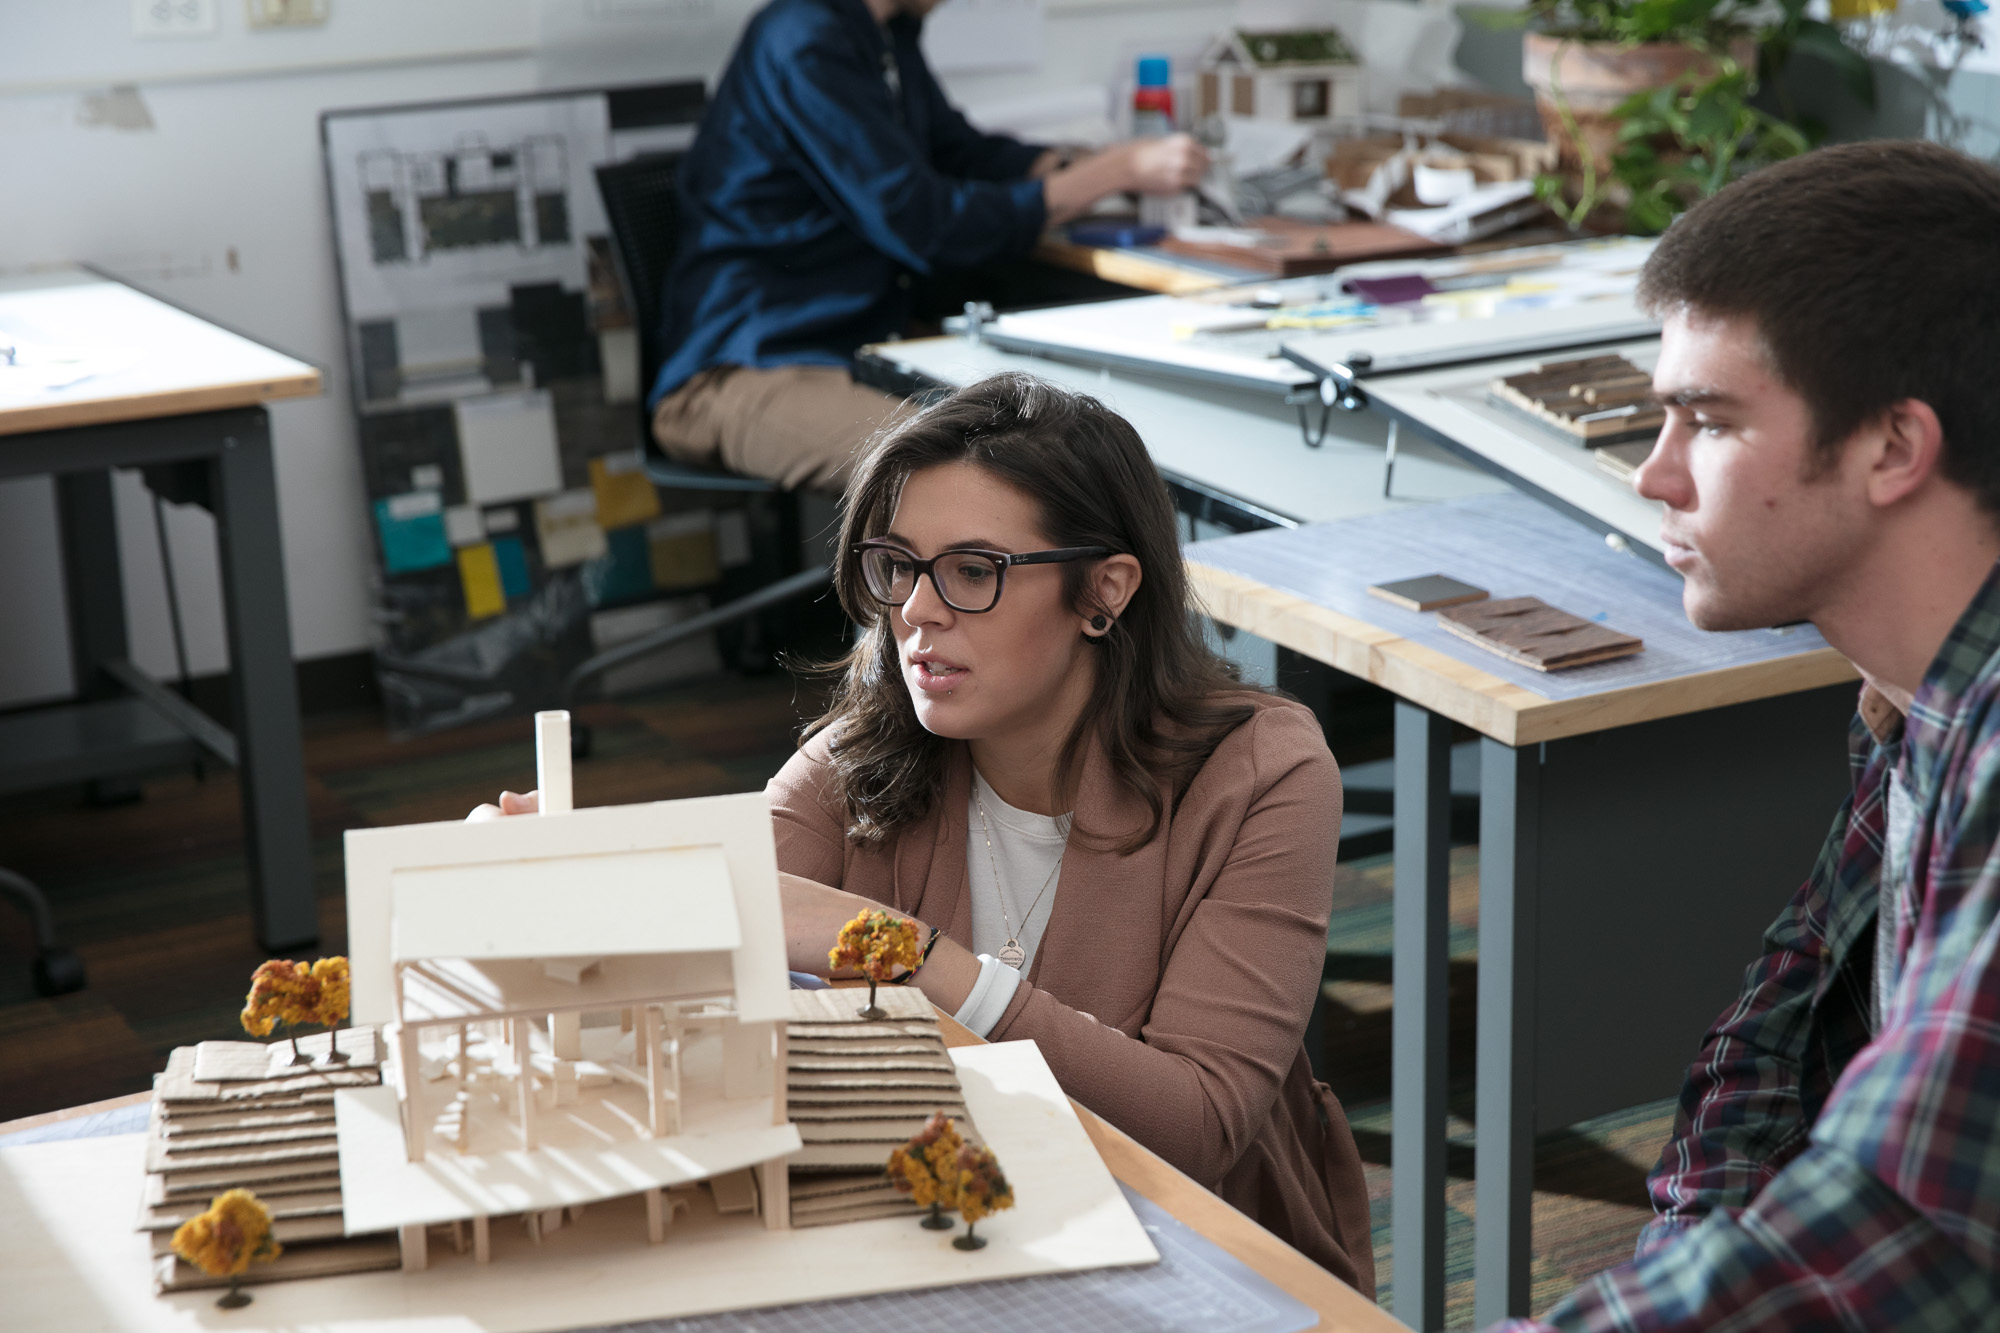 Students working with an architecture model